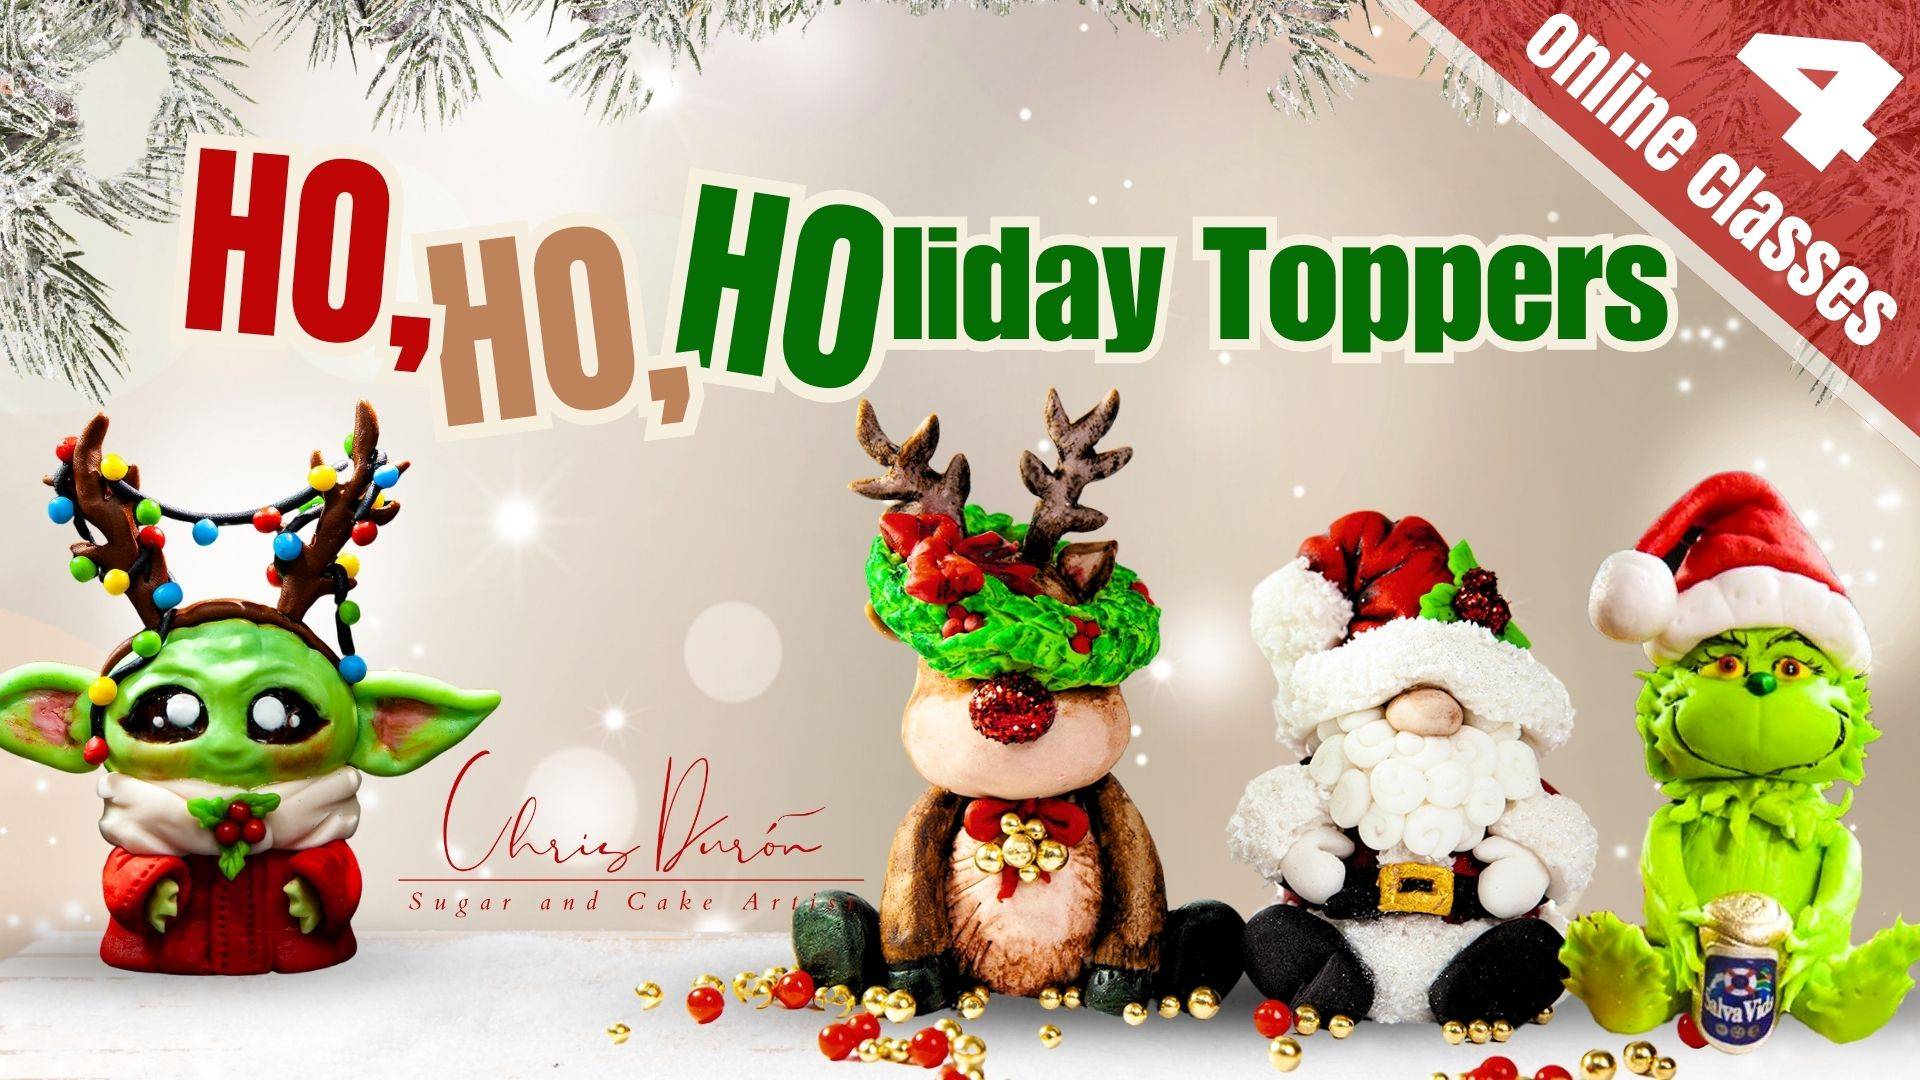 HOHOHOlidays – Christmas Cake Toppers Classes Pack